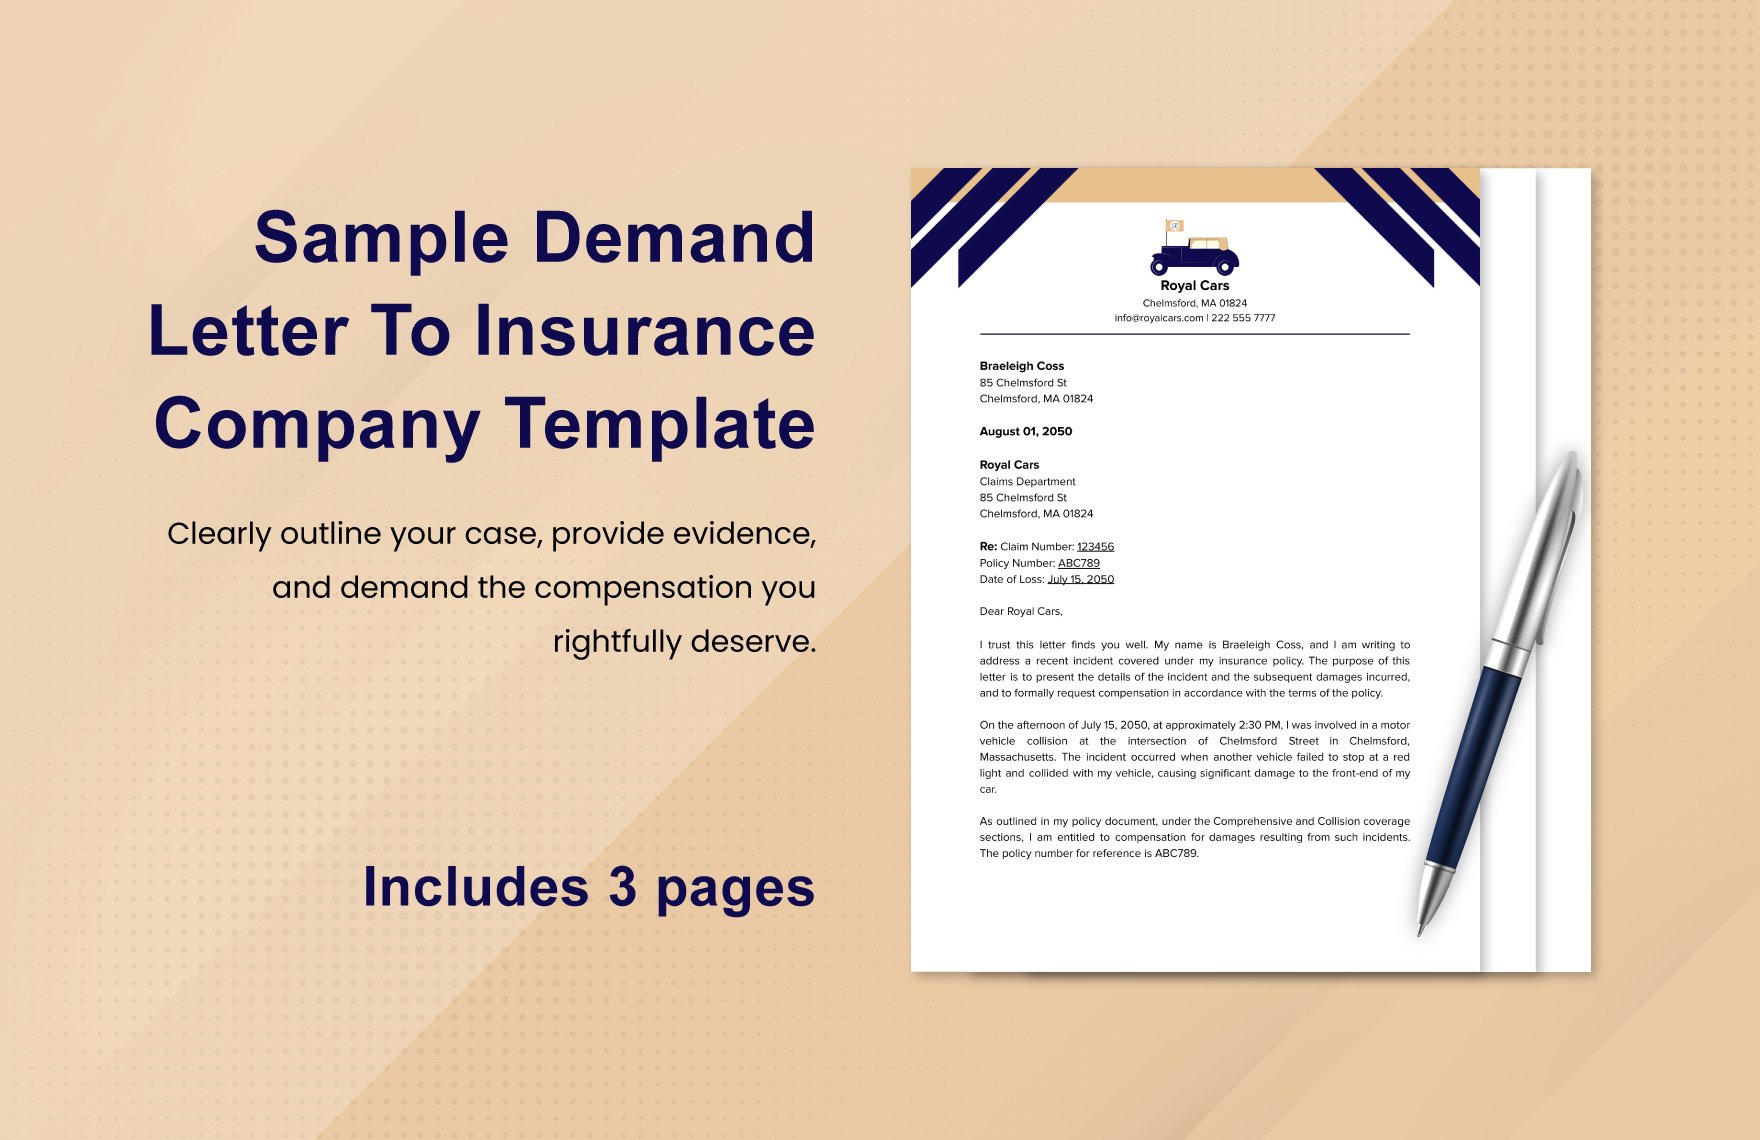 Sample Demand Letter To Insurance Company Template